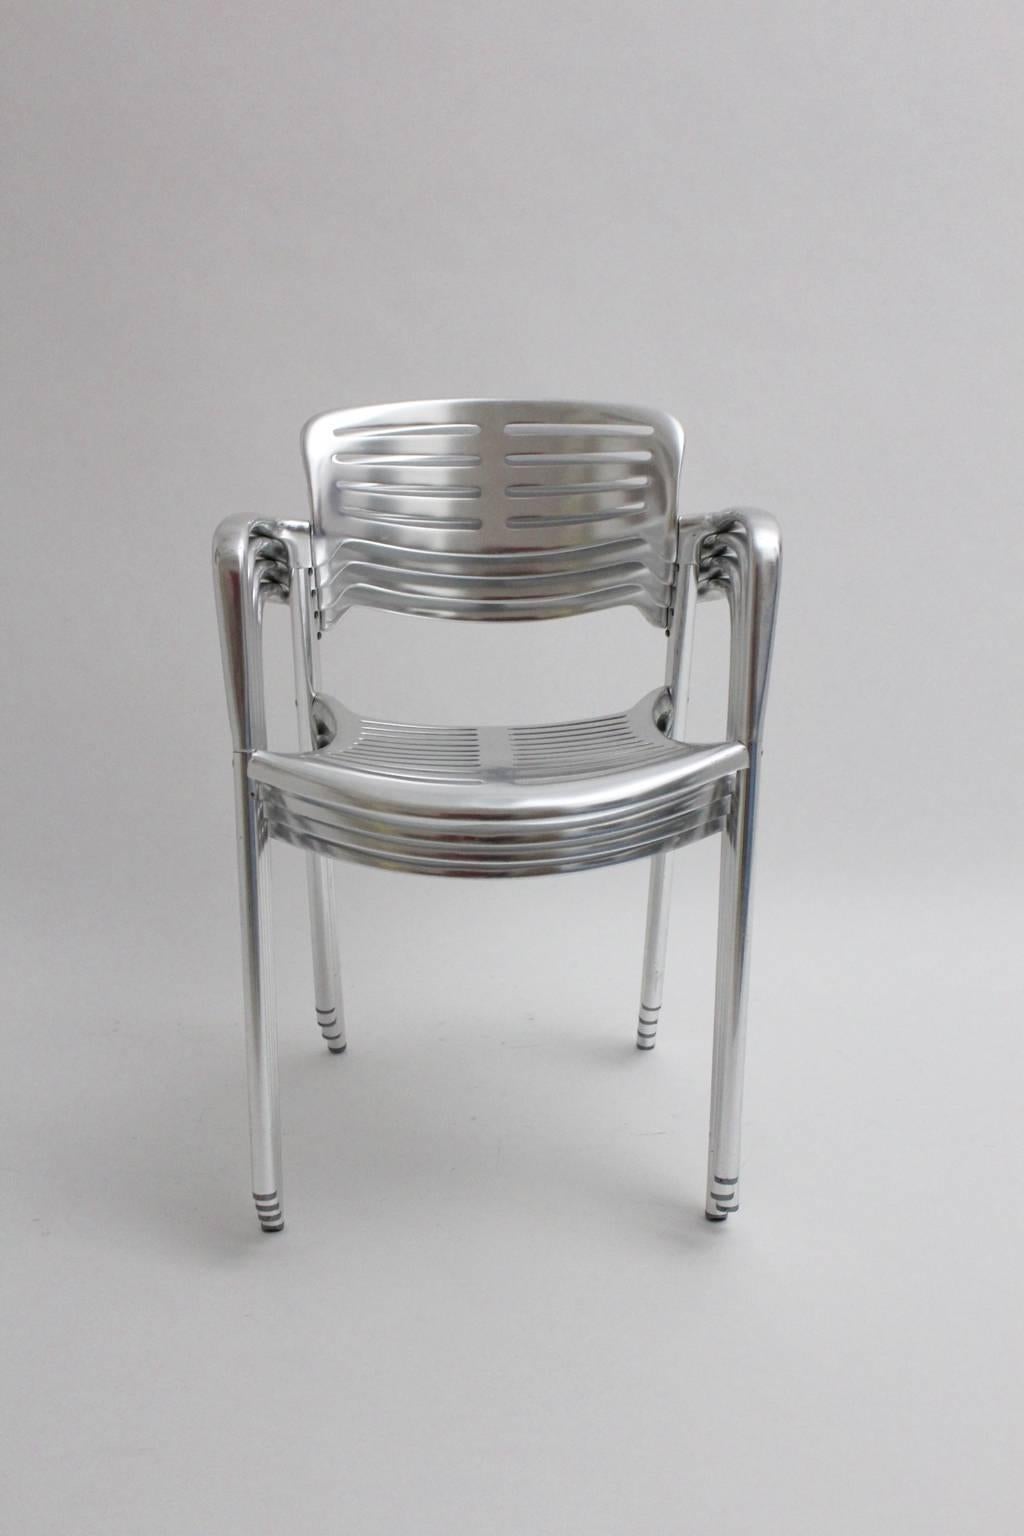 Cast Modern Aluminum Stacking Chairs Garden Chairs Dining Chairs Jorge Pensi 1980s For Sale